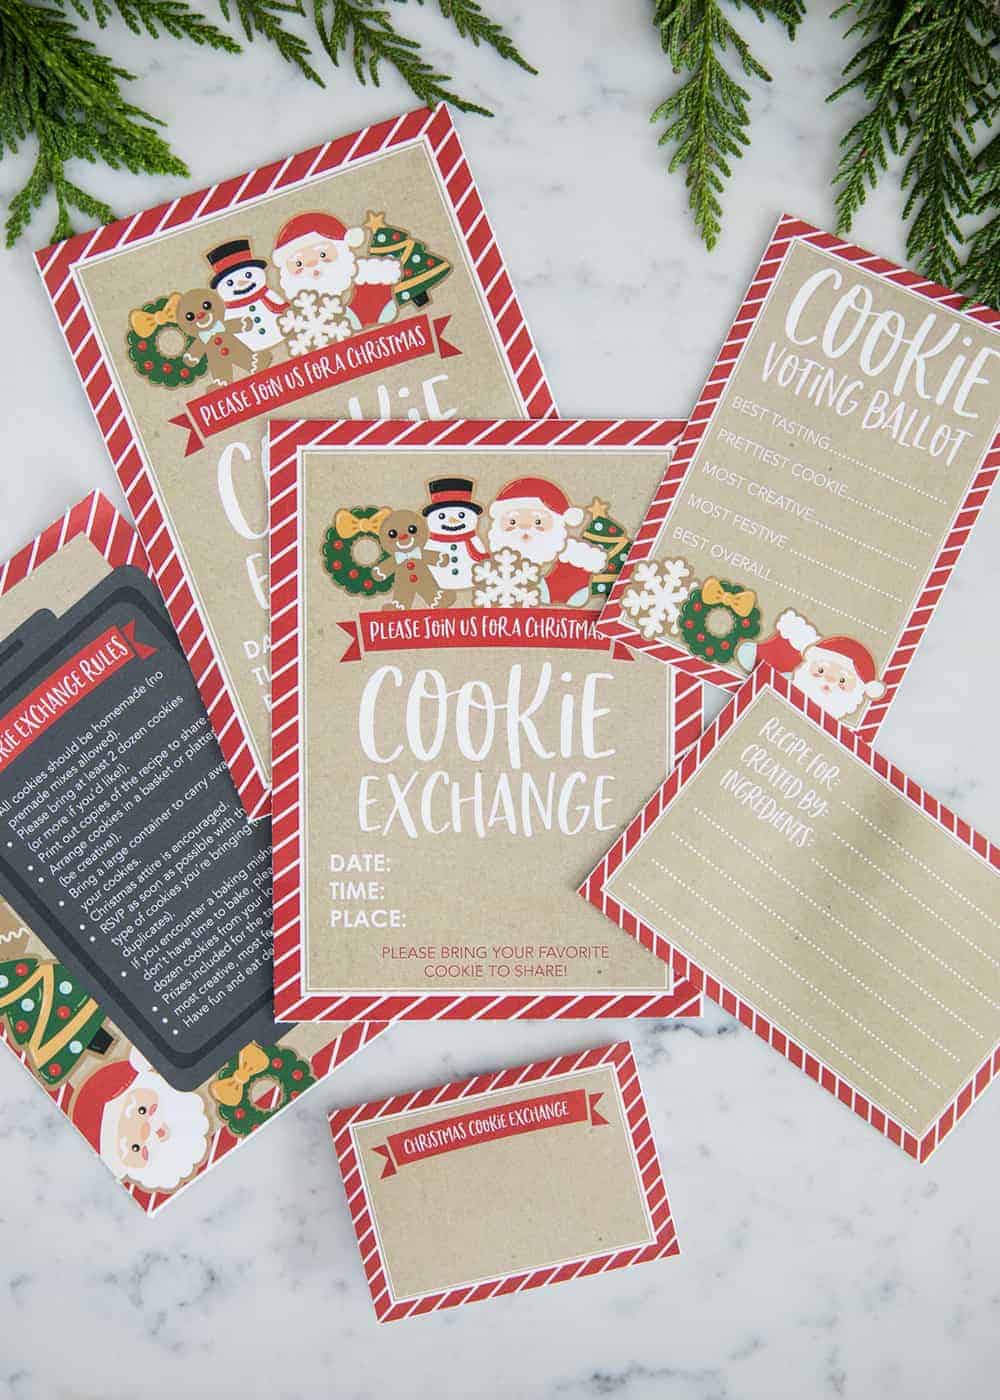 How to Host a Cookie Exchange (w/ free printables!) - I Heart Naptime Within Cookie Exchange Recipe Card Template